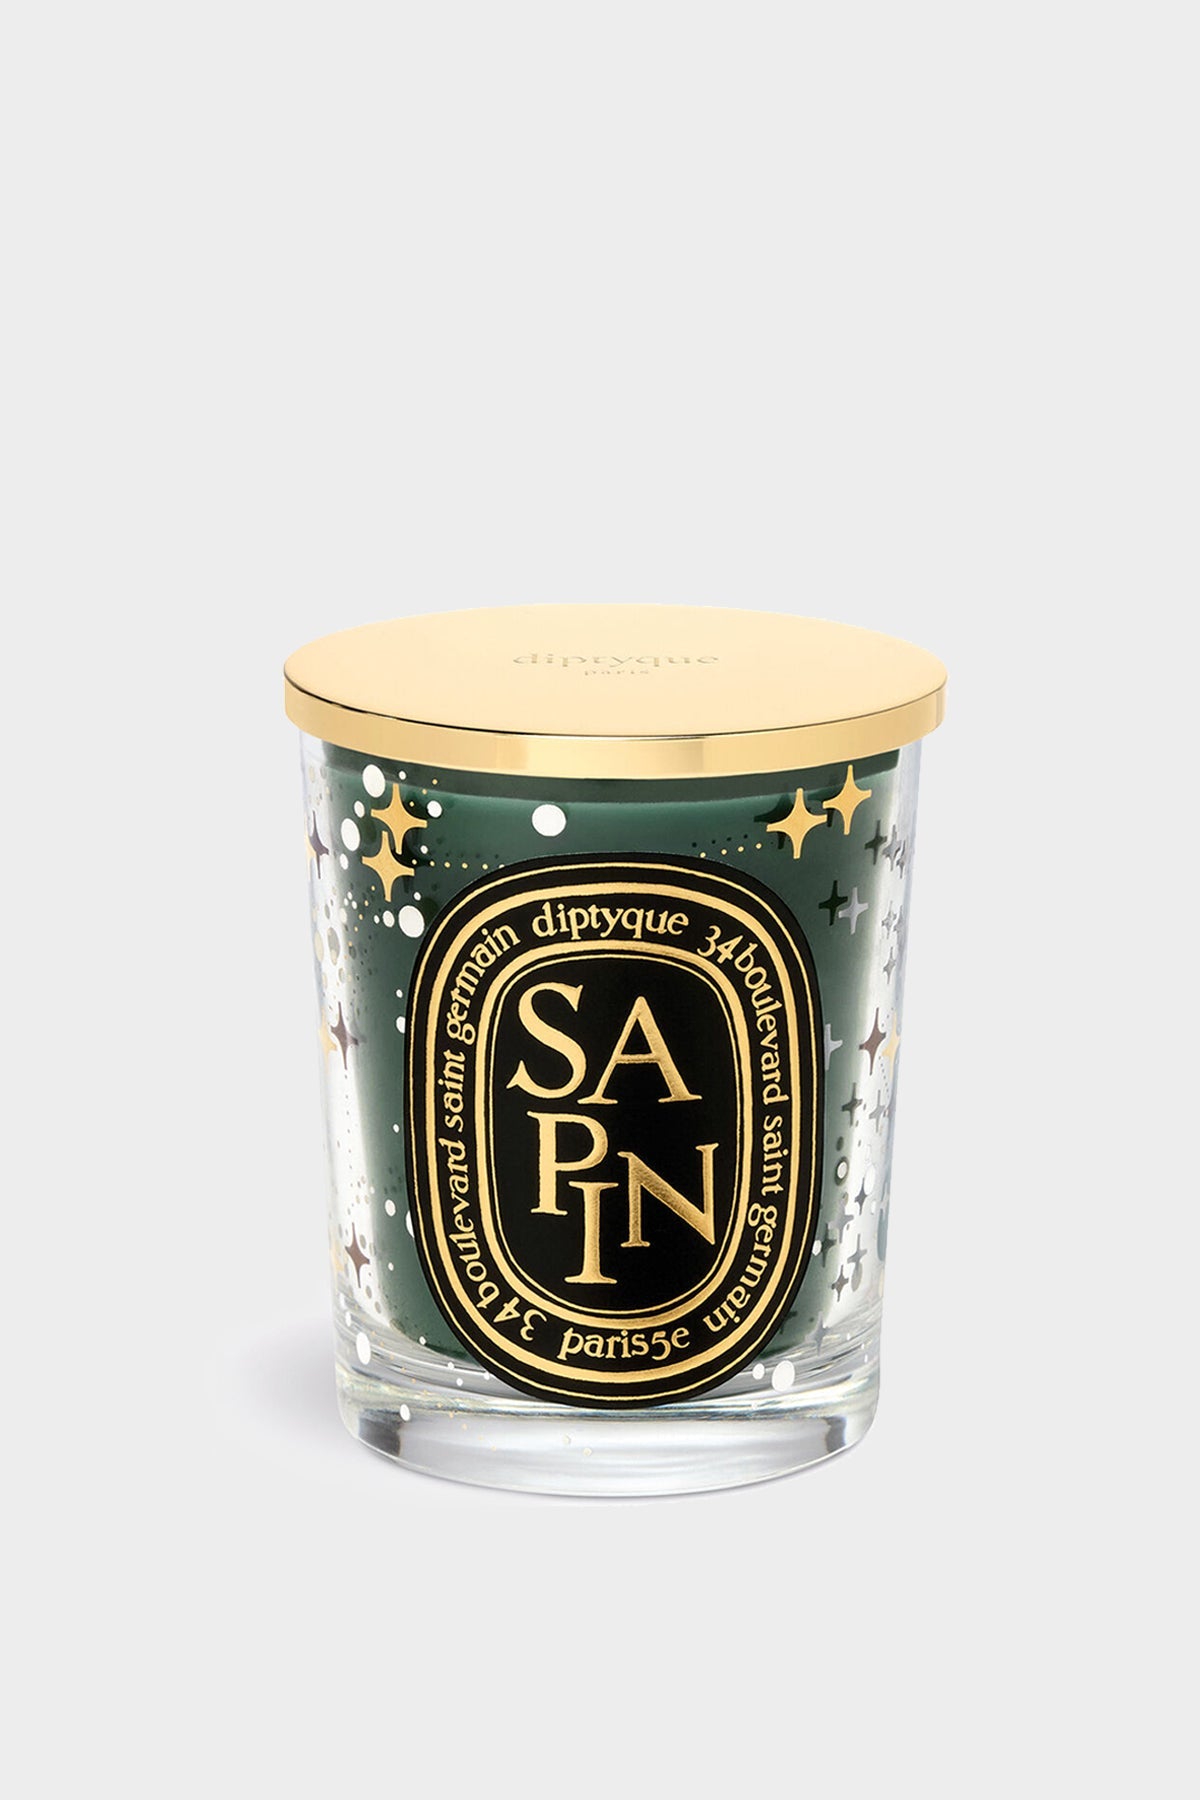 Sapin (Pine Tree) Candle 190g - Limited Edition - shop-olivia.com